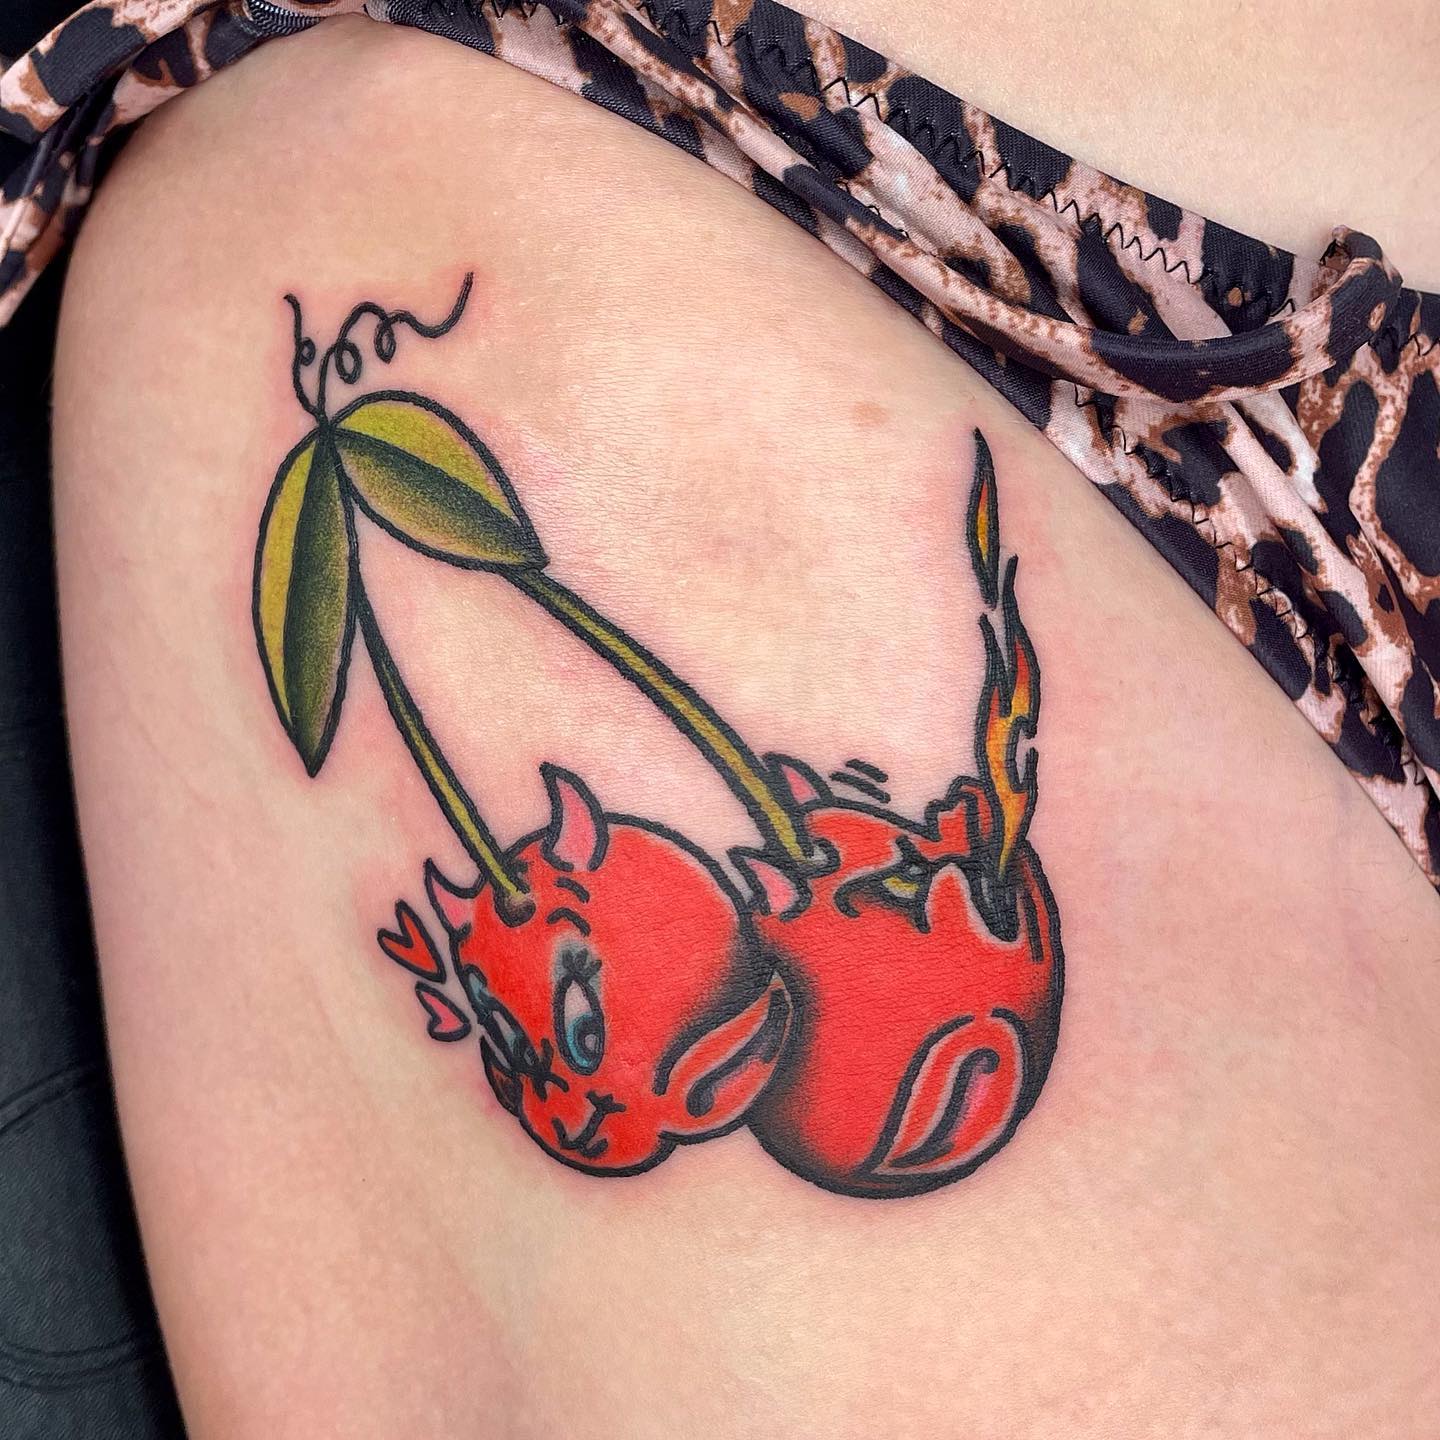 Small, bright red, and super fun, this little daredevil cherry tattoo is for those who like to look witty. Give this tattoo a go if you’re looking for something fun and cheerful.